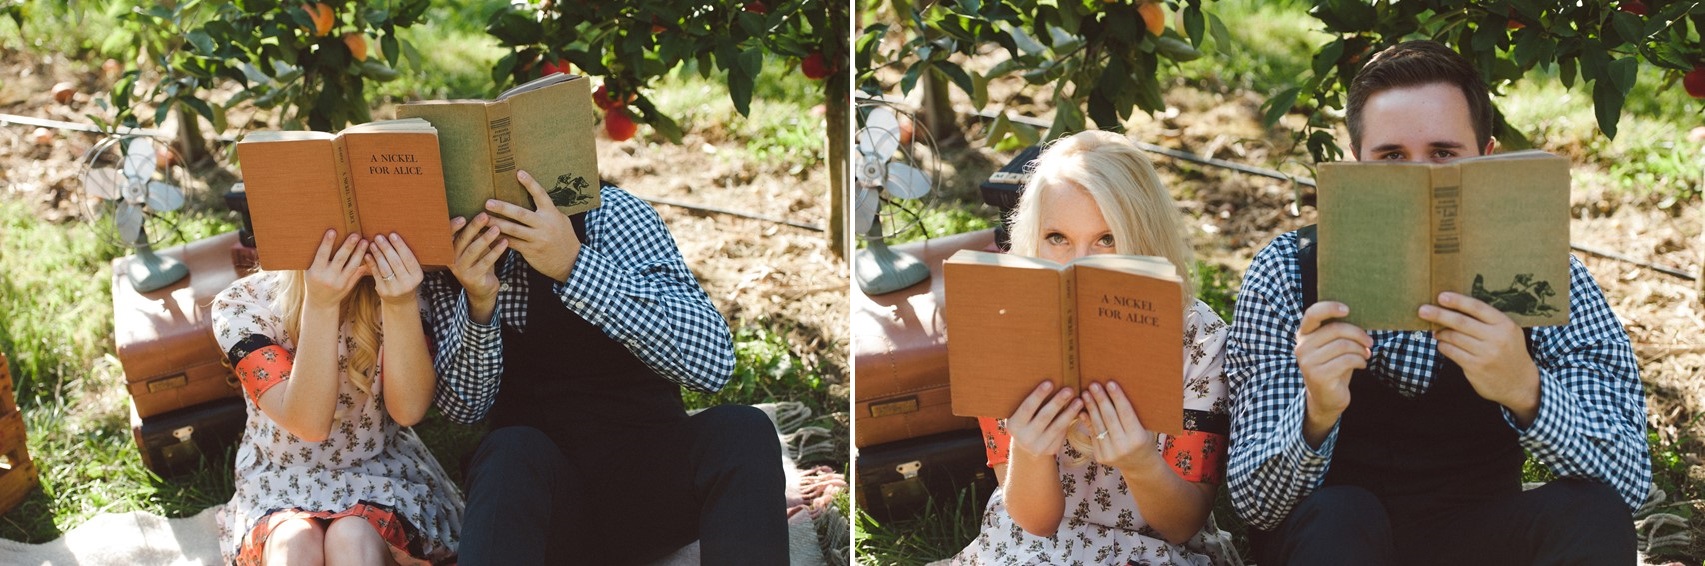 Vintage Books - A Sweet Summer Apple Orchard Engagement Session